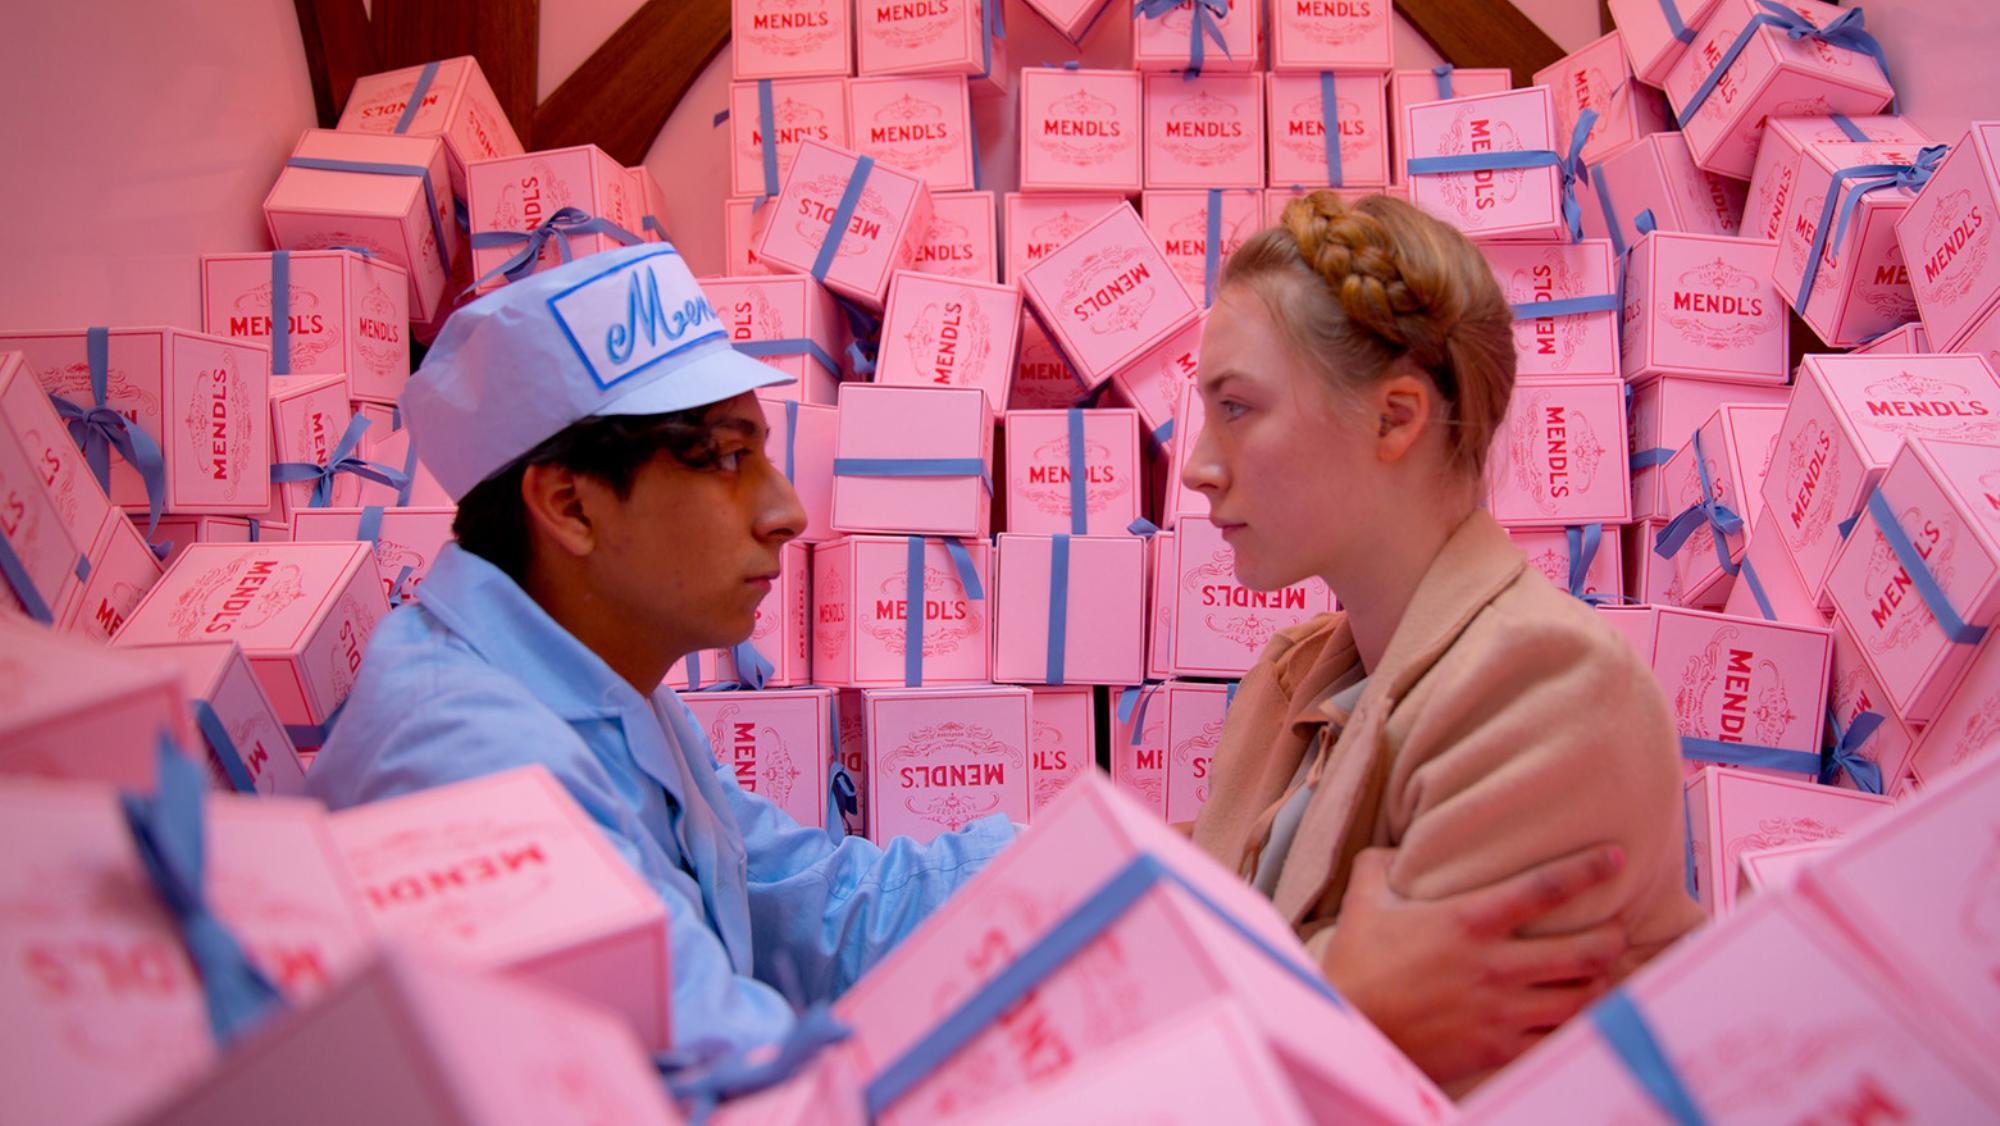 5 Wes Anderson Creations We Wish We Could Buy - LAmag - Culture